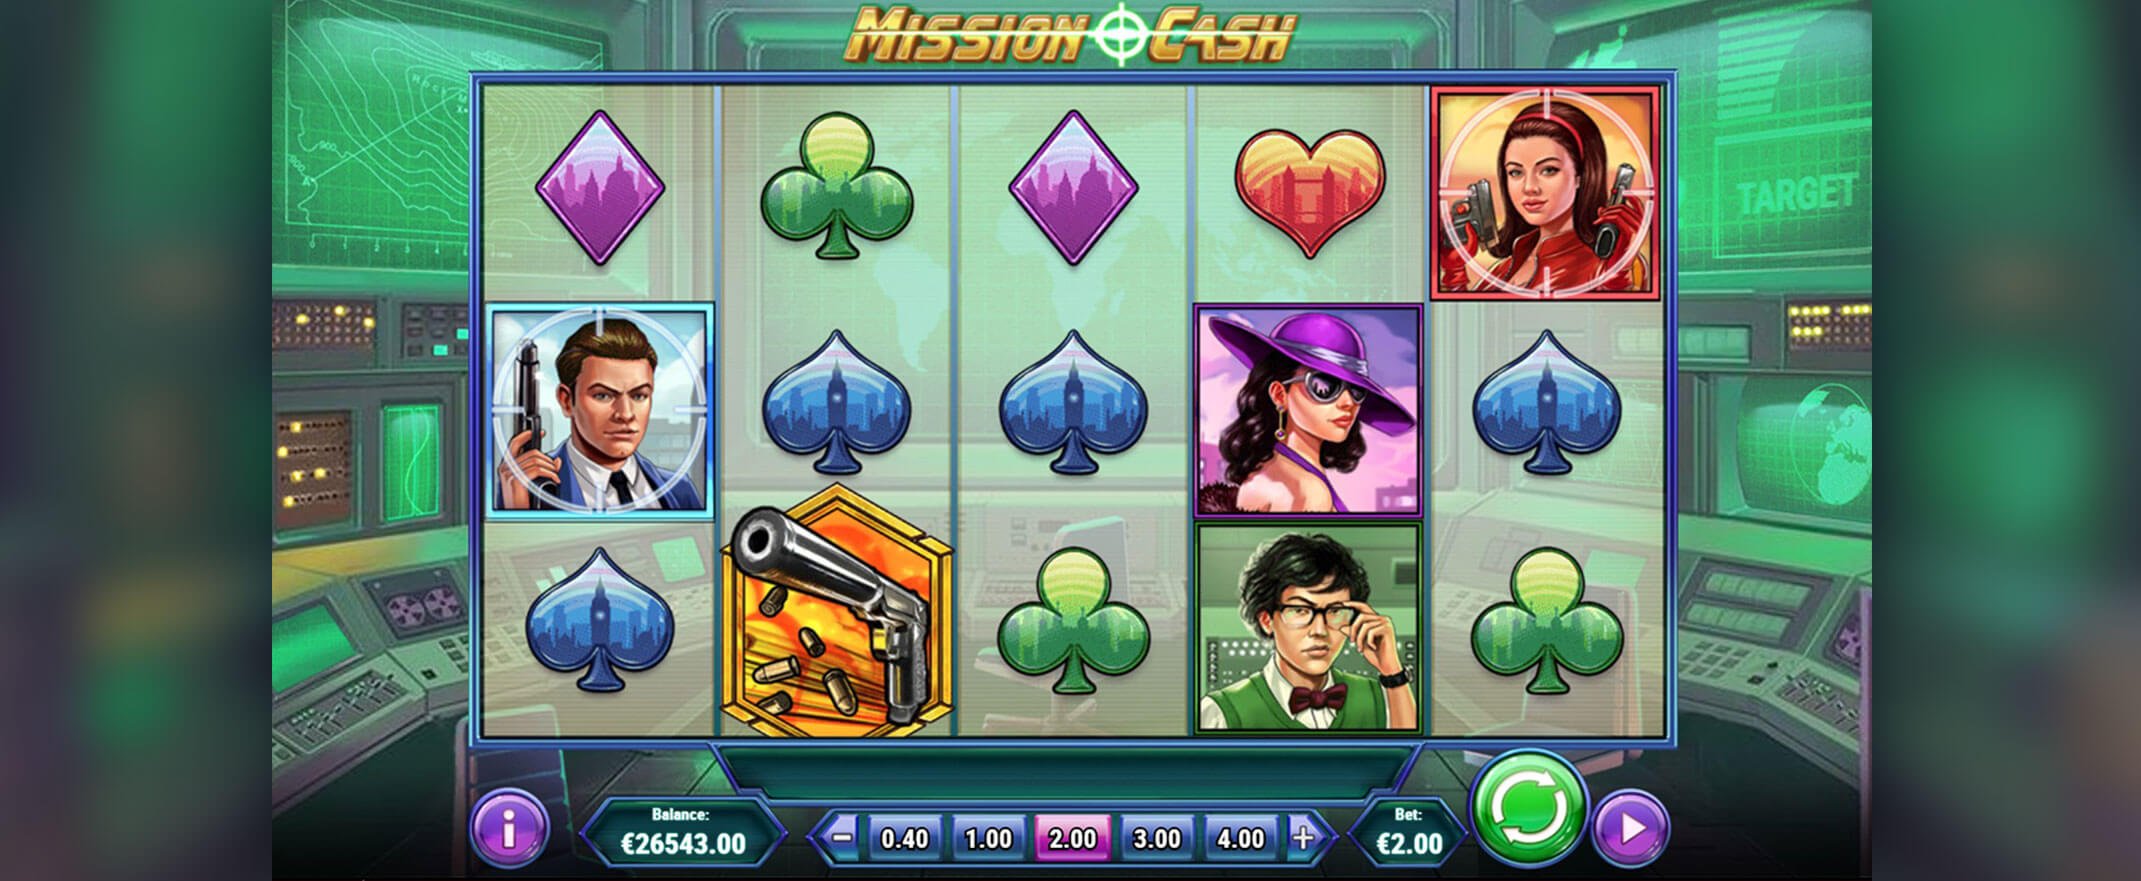 Mission Cash video slot by Play'n Go